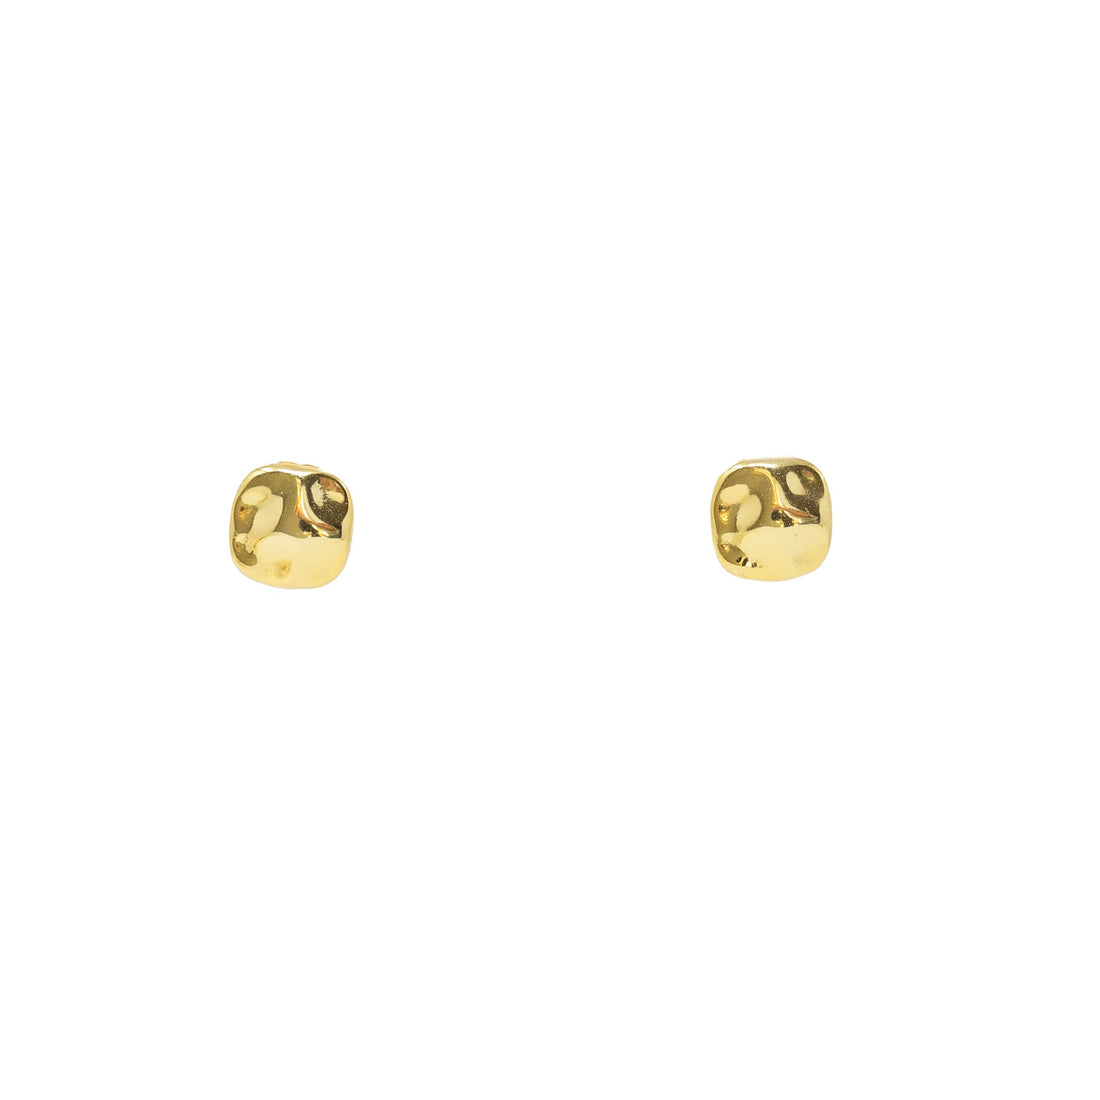 THE GOLD HAMMERED STUDS